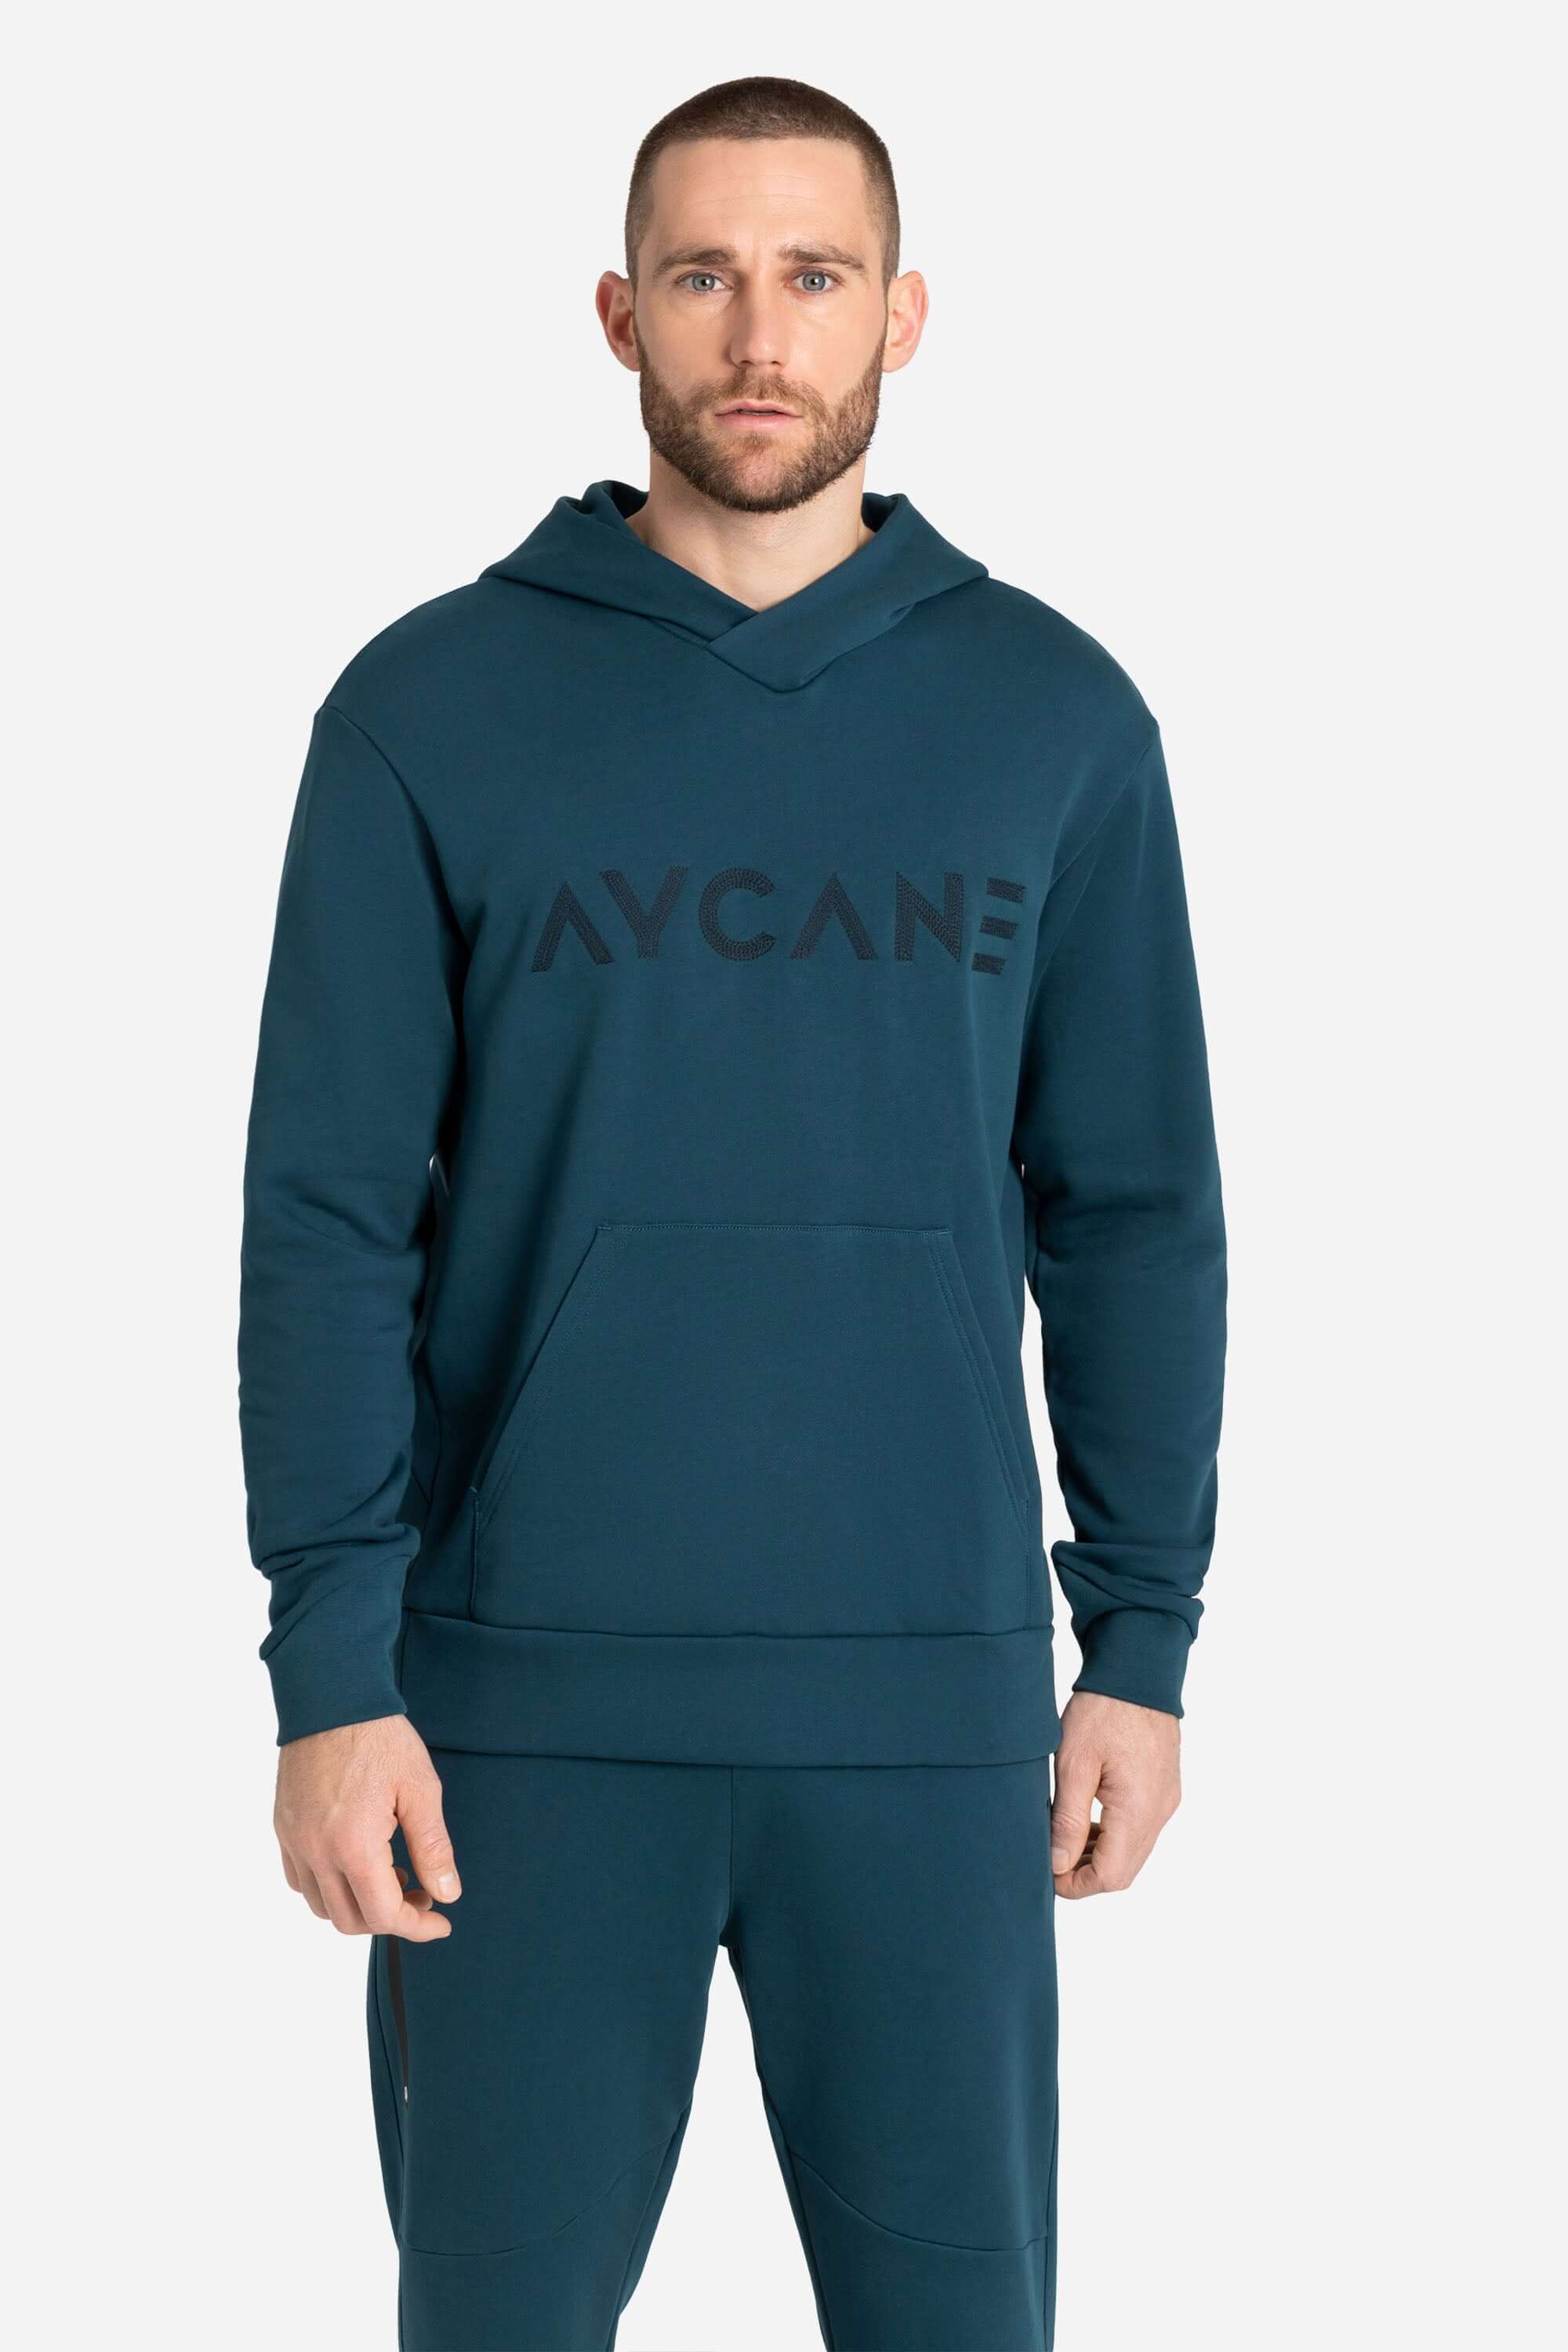 Blue training and leisure hoodie with AYCANE logo in black 